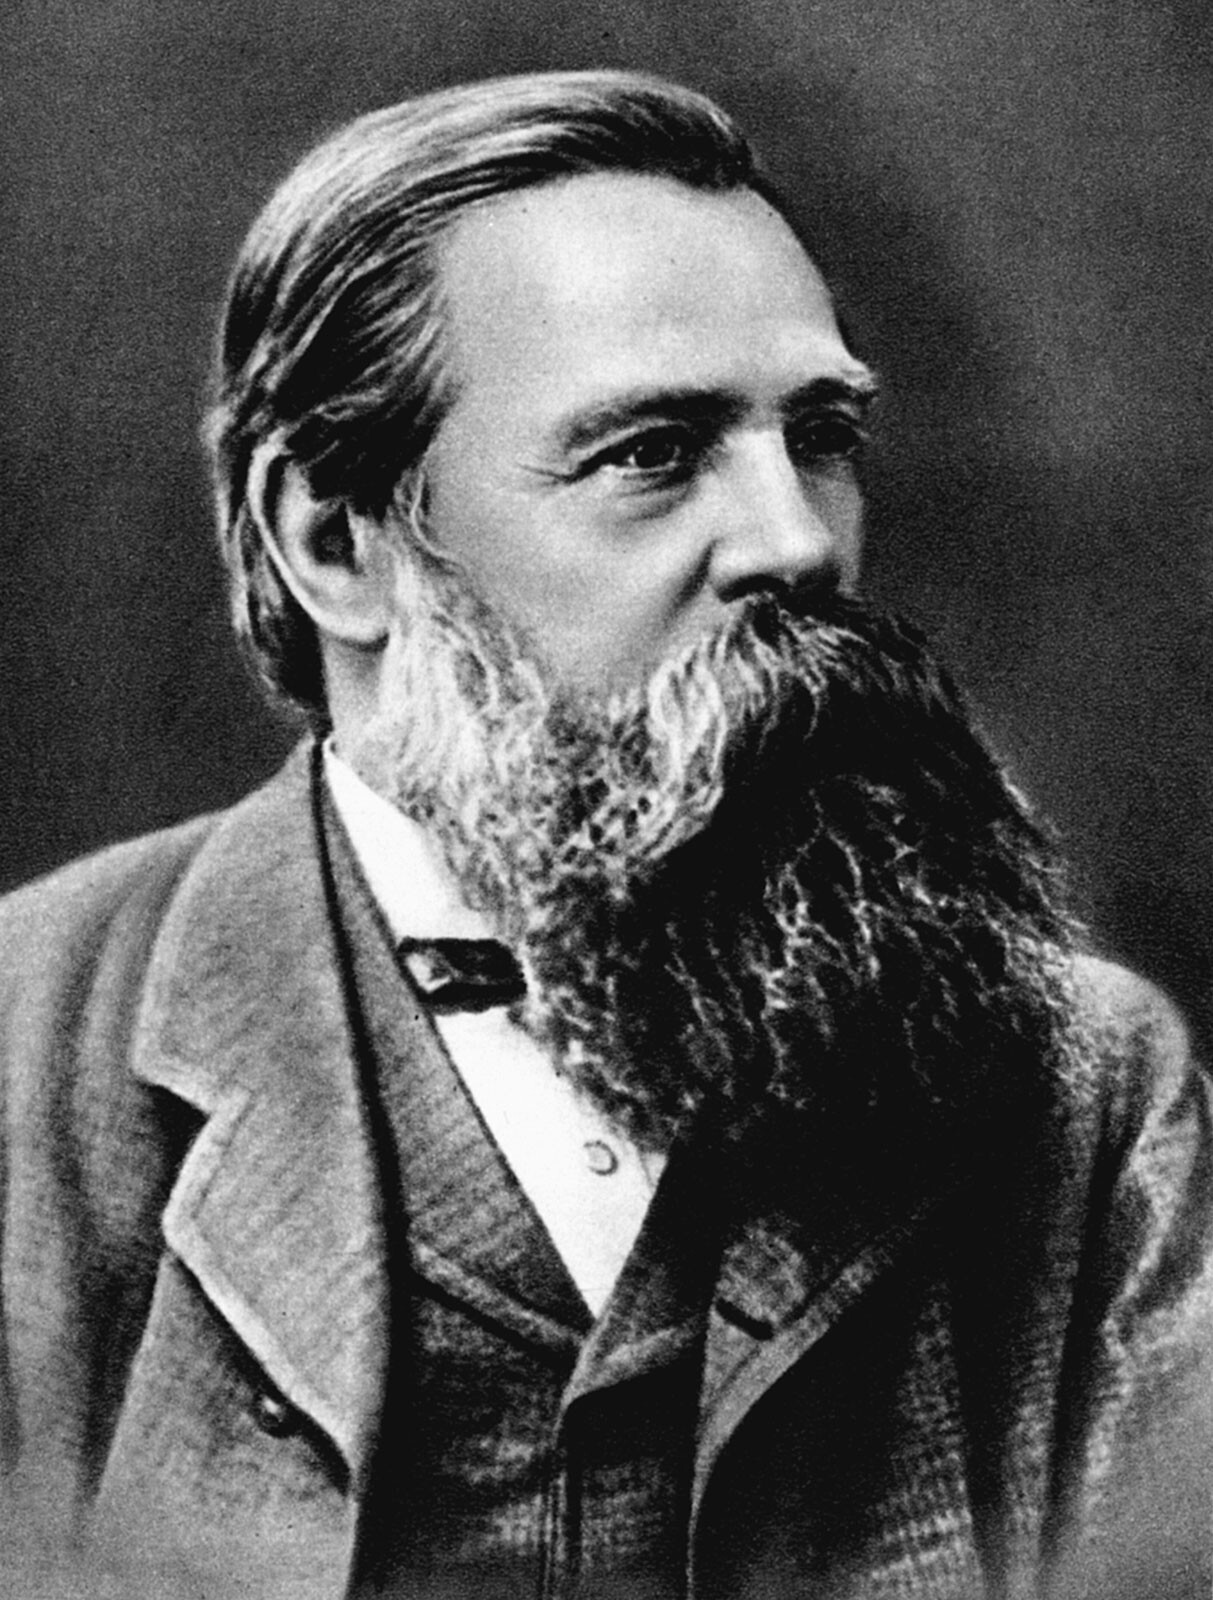 what century did friedrich engles live?